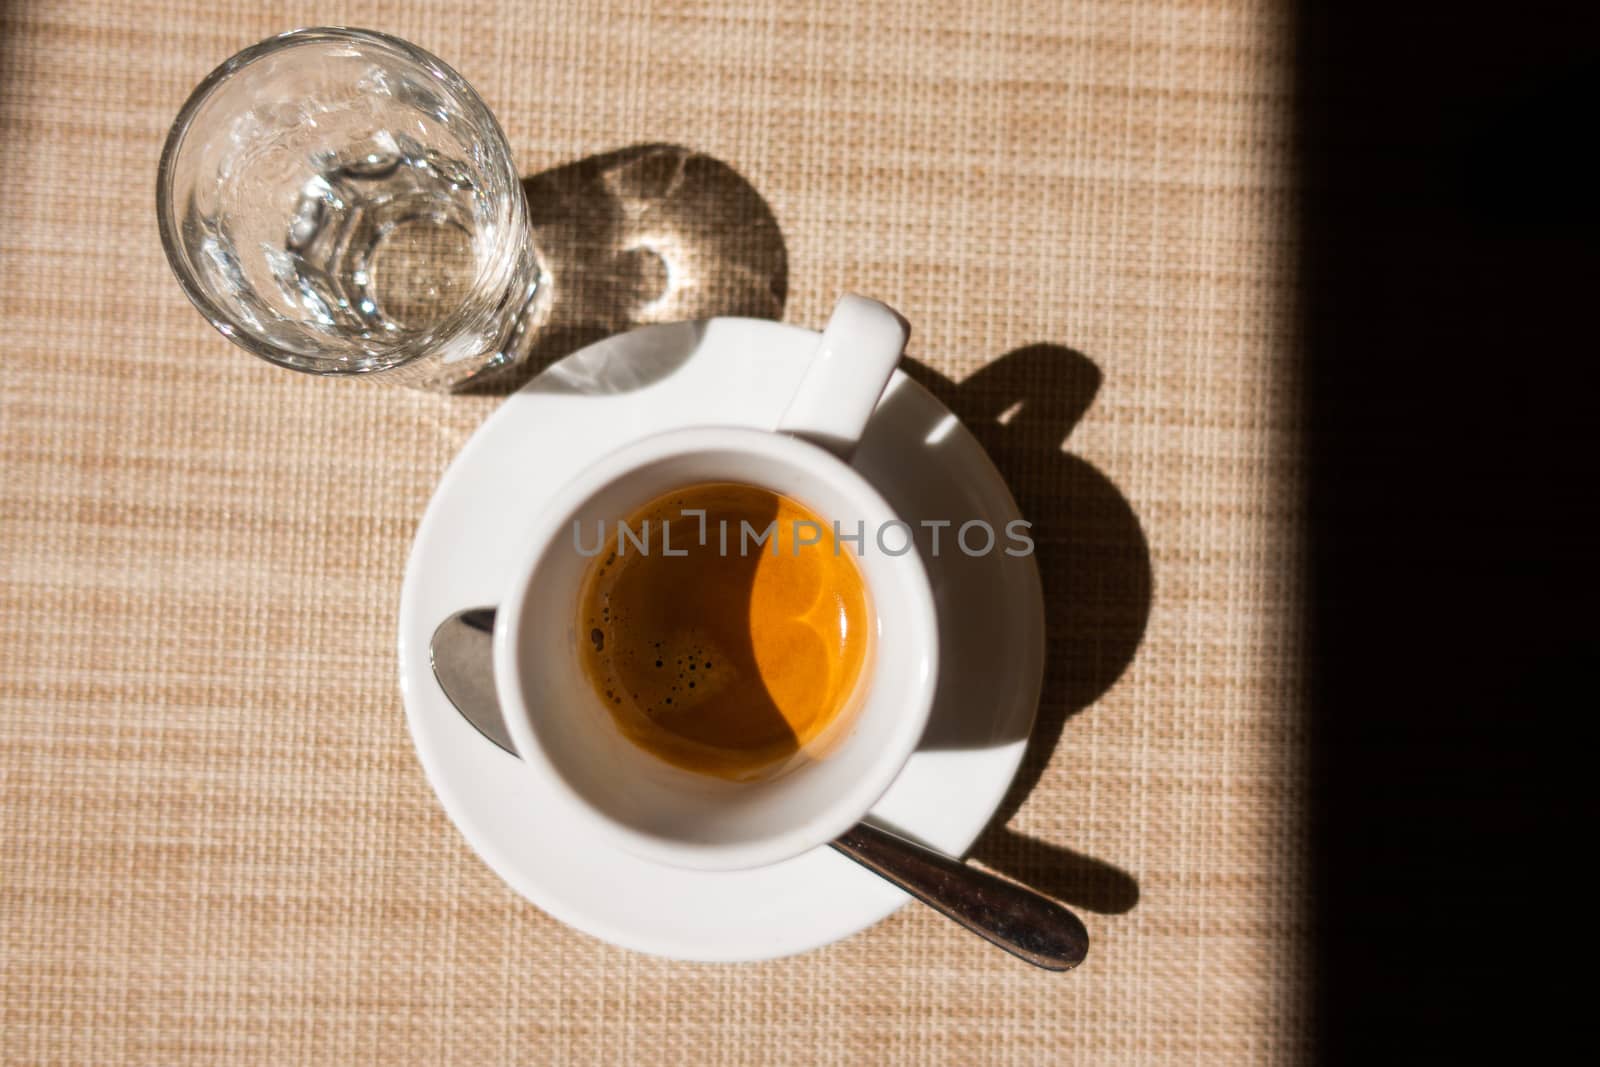 Caffe corretto, traditional Italian beverage with espresso and a shot of liquor, usually grappa, top view on beige background and dark frame to right, copyspace